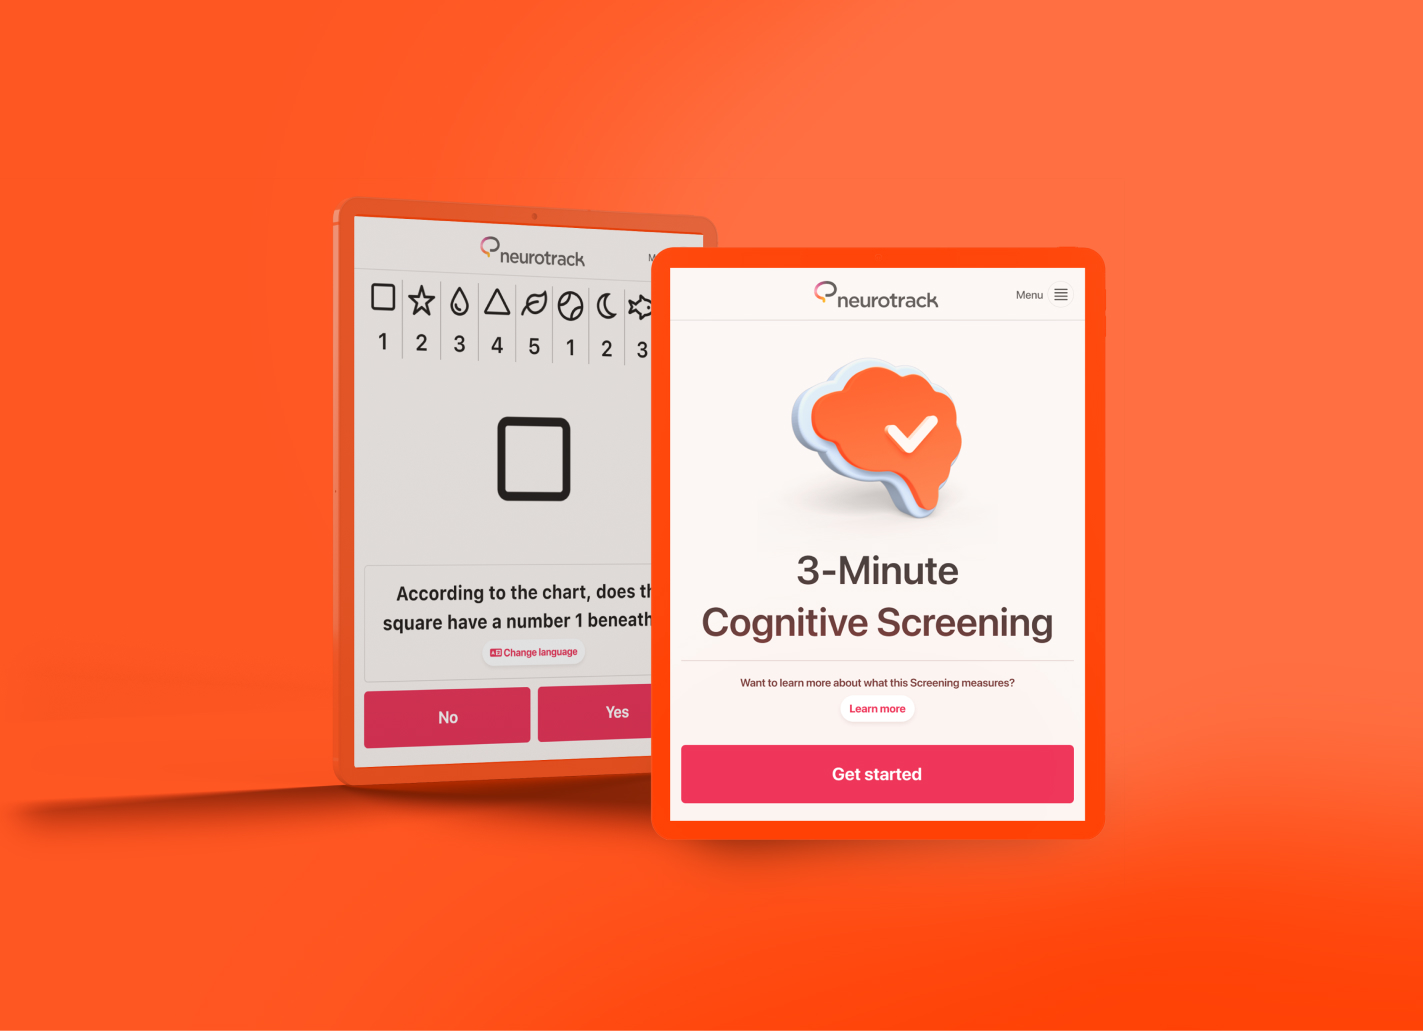 Neurotrack's 3-Minute Cognitive Screening